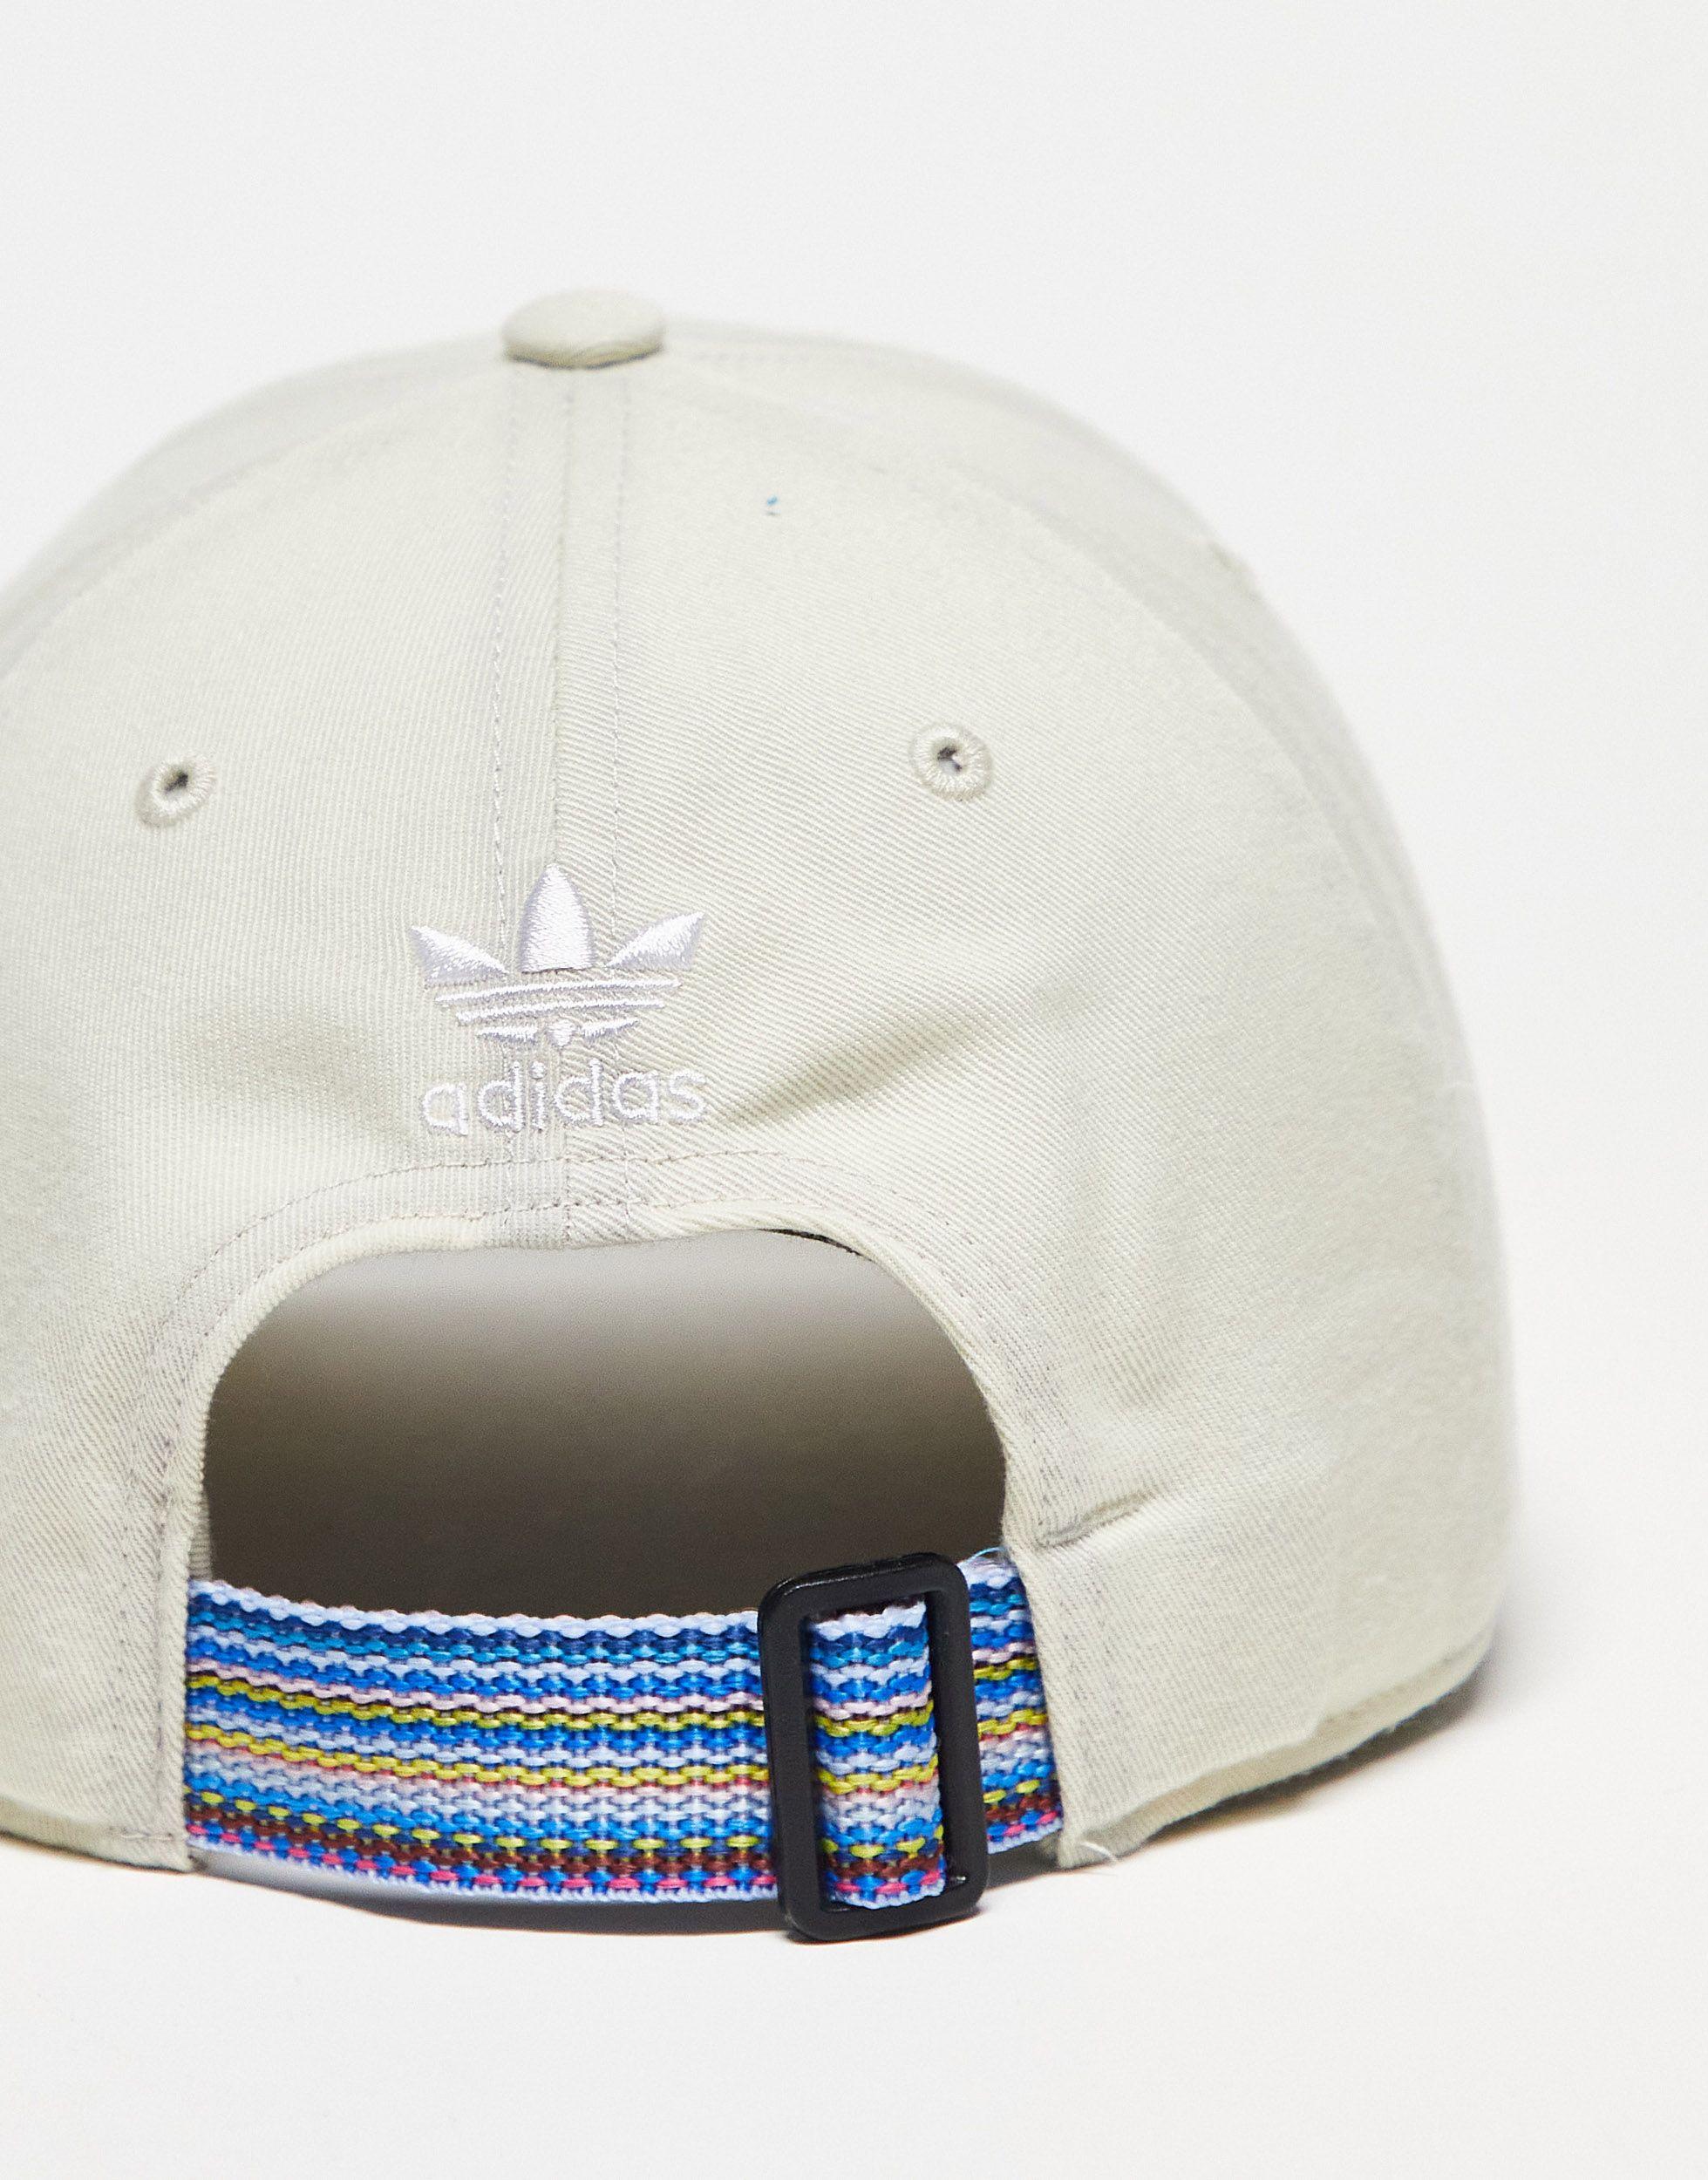 adidas Originals Strapback Cap With Woven Patch in White | Lyst